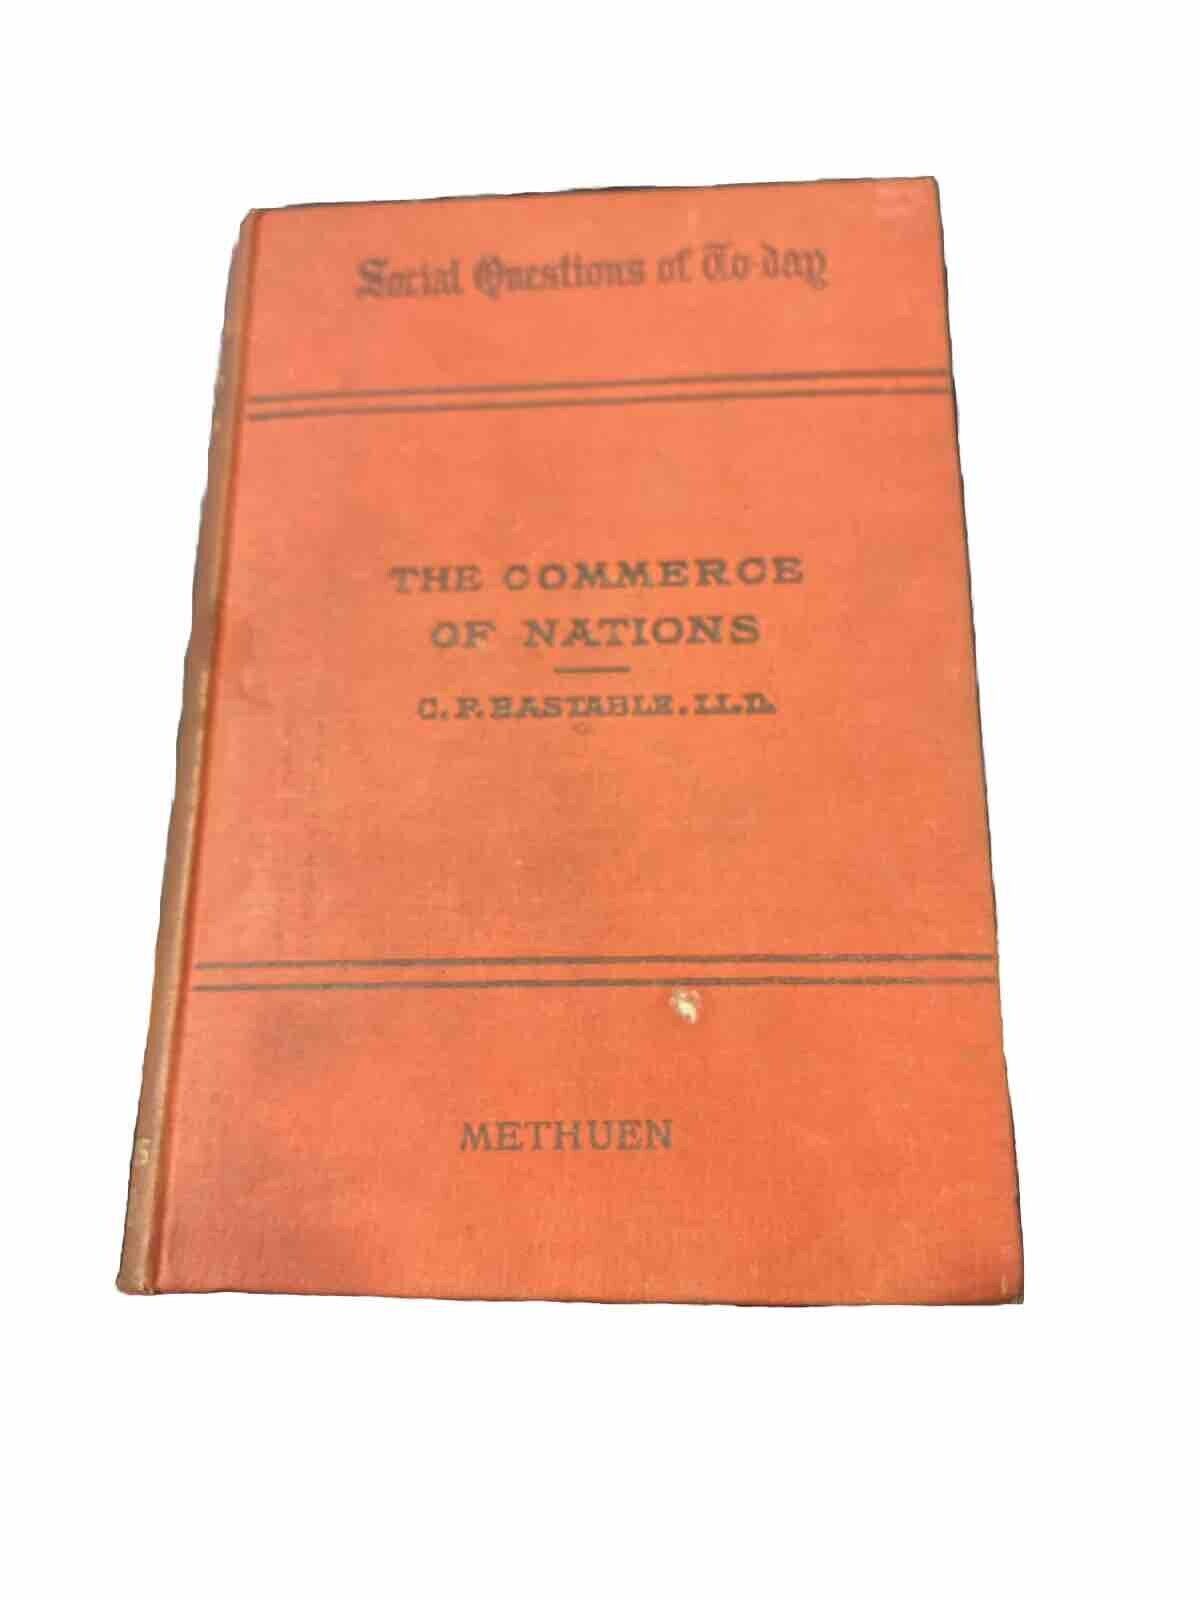 The Commerce Of Nations 1892 Bastable Methuen Social Questions Of Today Book